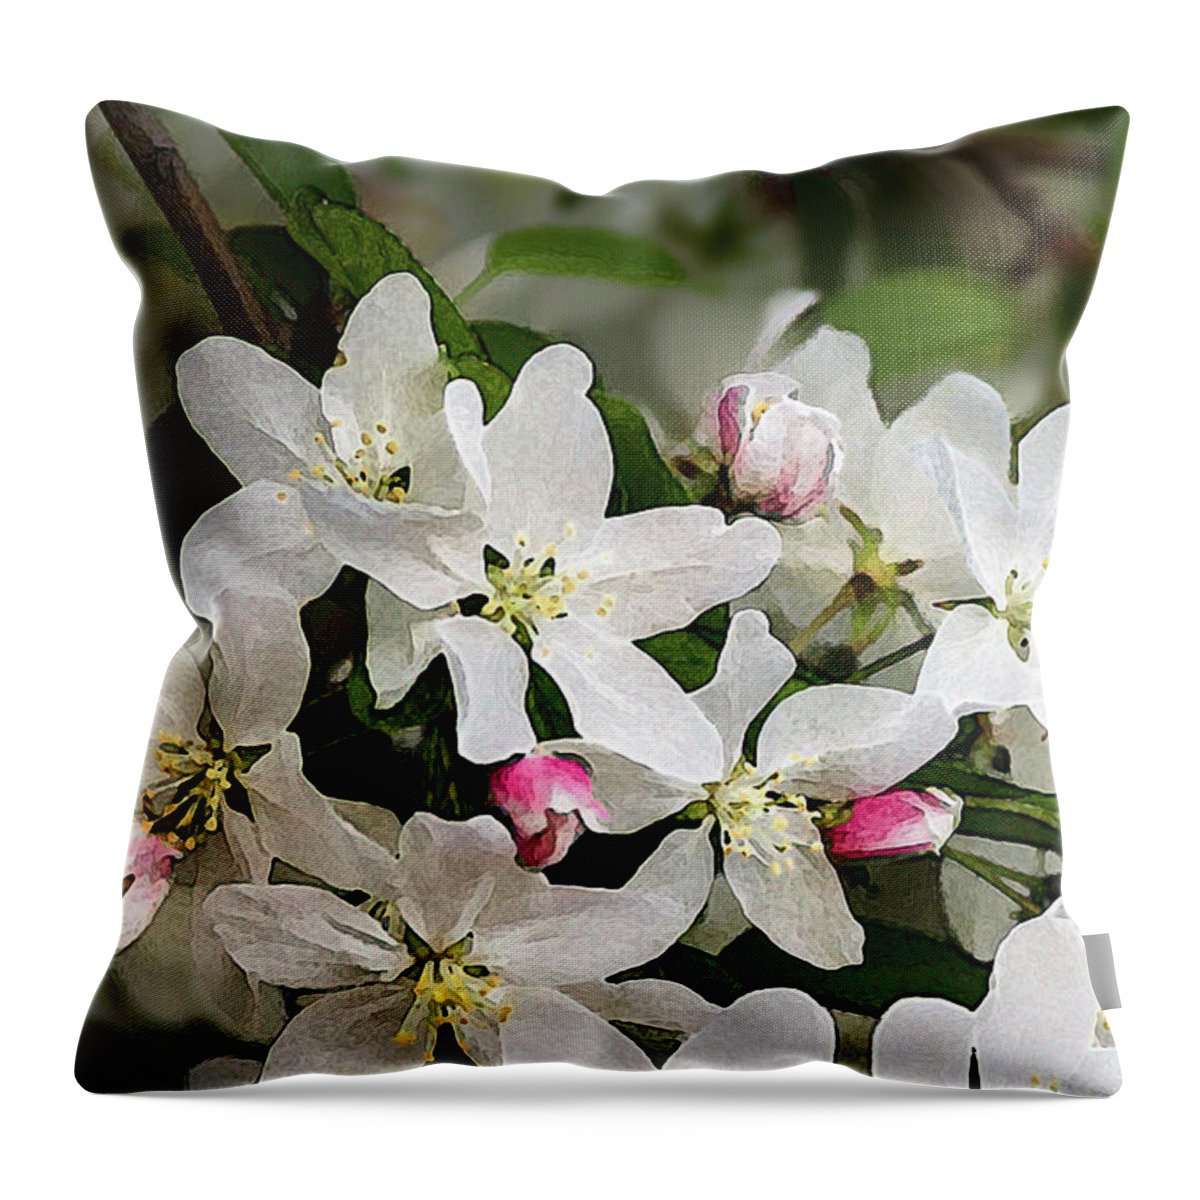 Crabapple Blossoms Throw Pillow featuring the photograph Crabapple Blossoms 13 - by Julie Weber